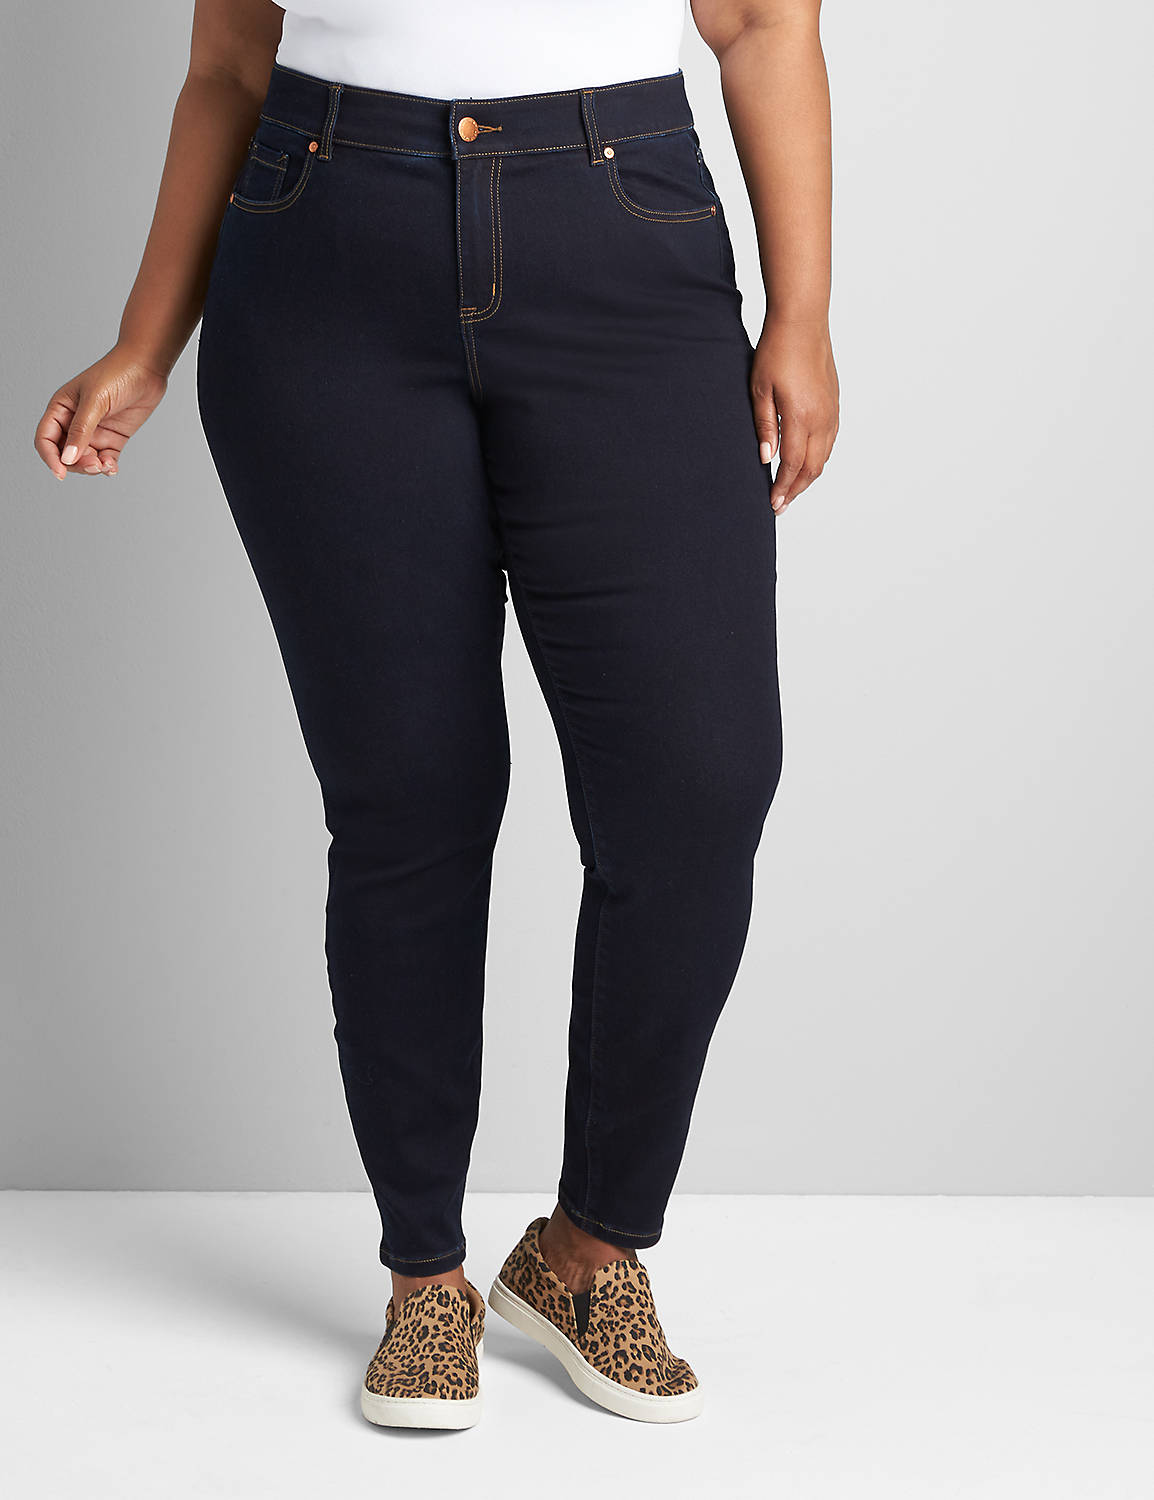 CURVY HIGH RISE SKINNY- RINSE WASH Product Image 1